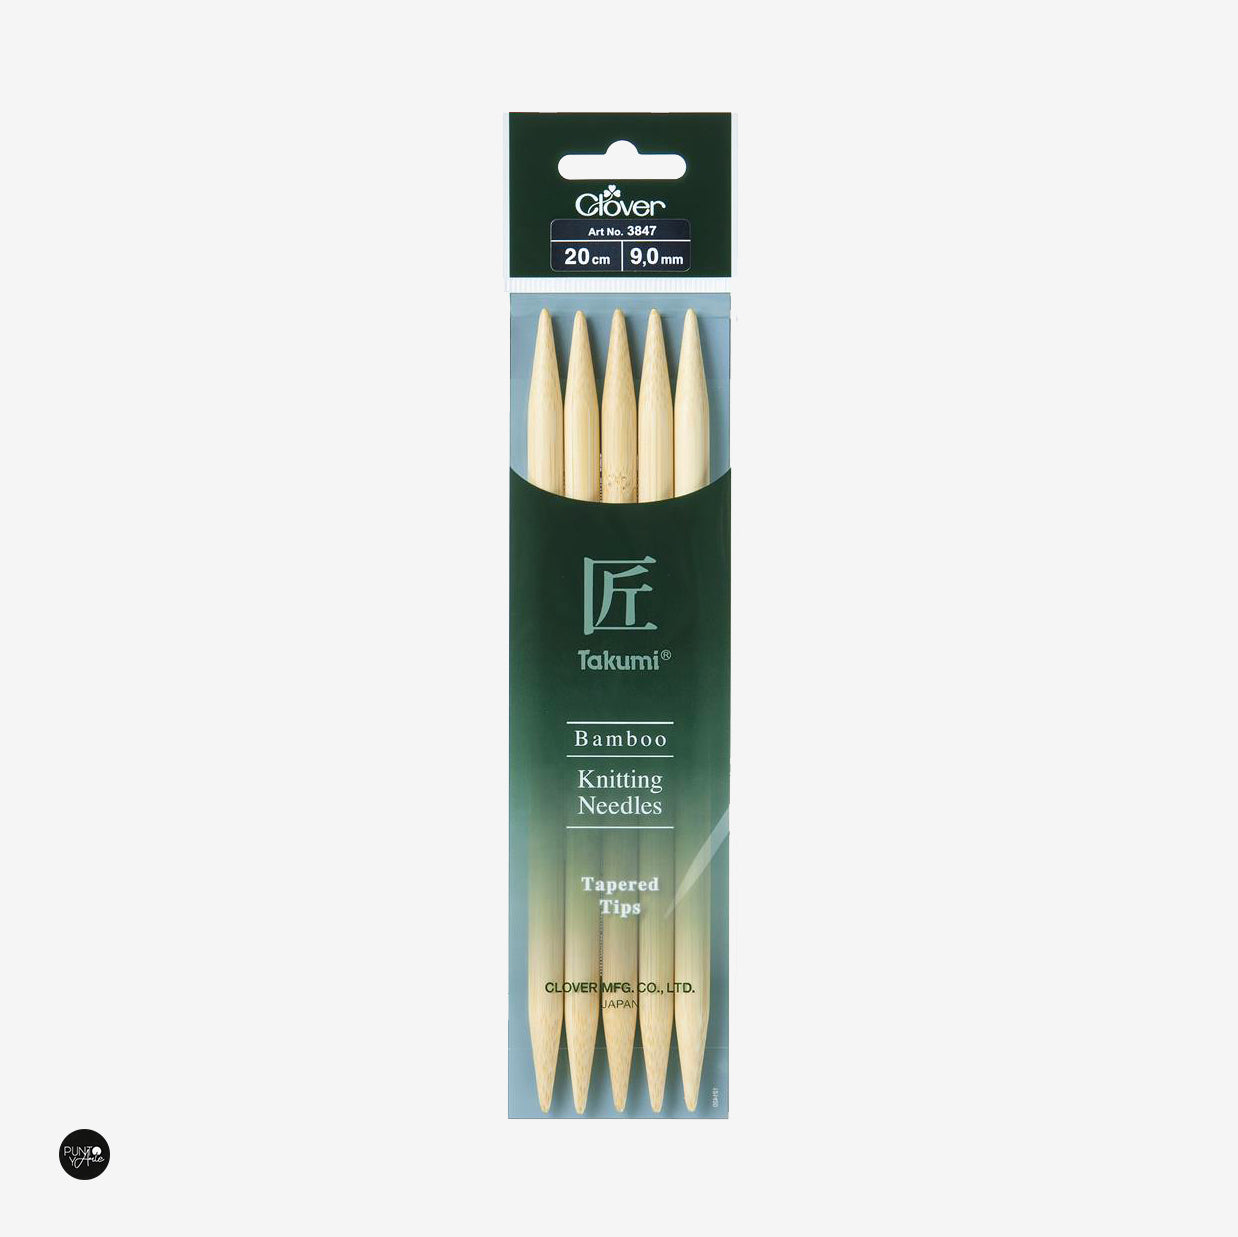 Takumi Bamboo Double Pointed Knitting Needles 20cm Clover | Quality and comfort for your knitting projects